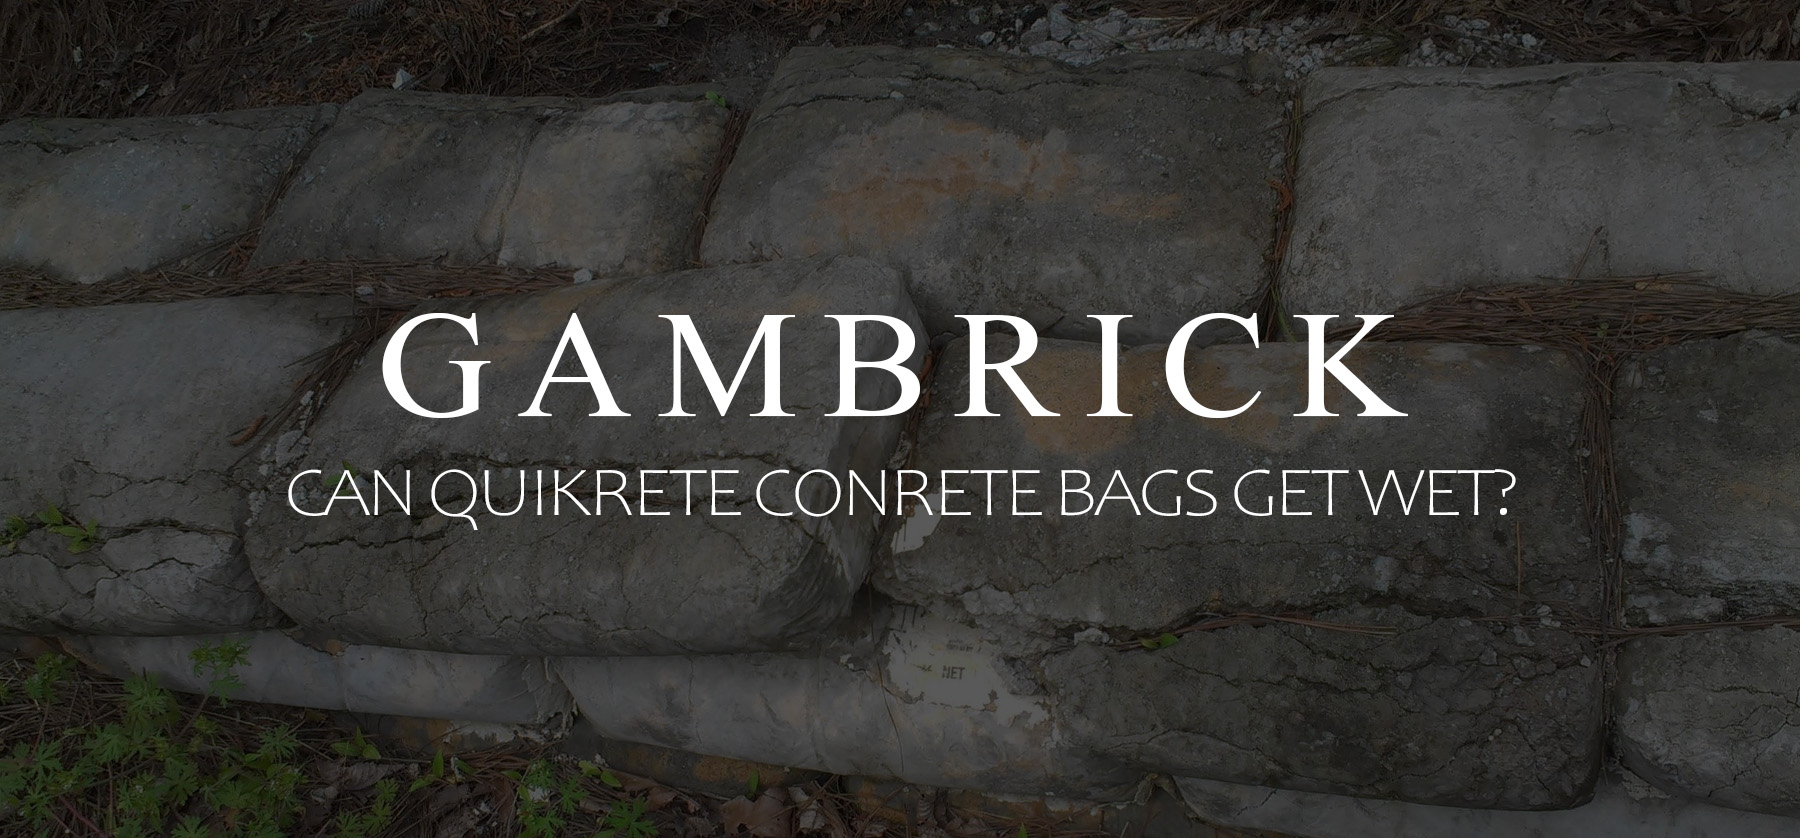 can quikrete concrete bags get wet banner pic